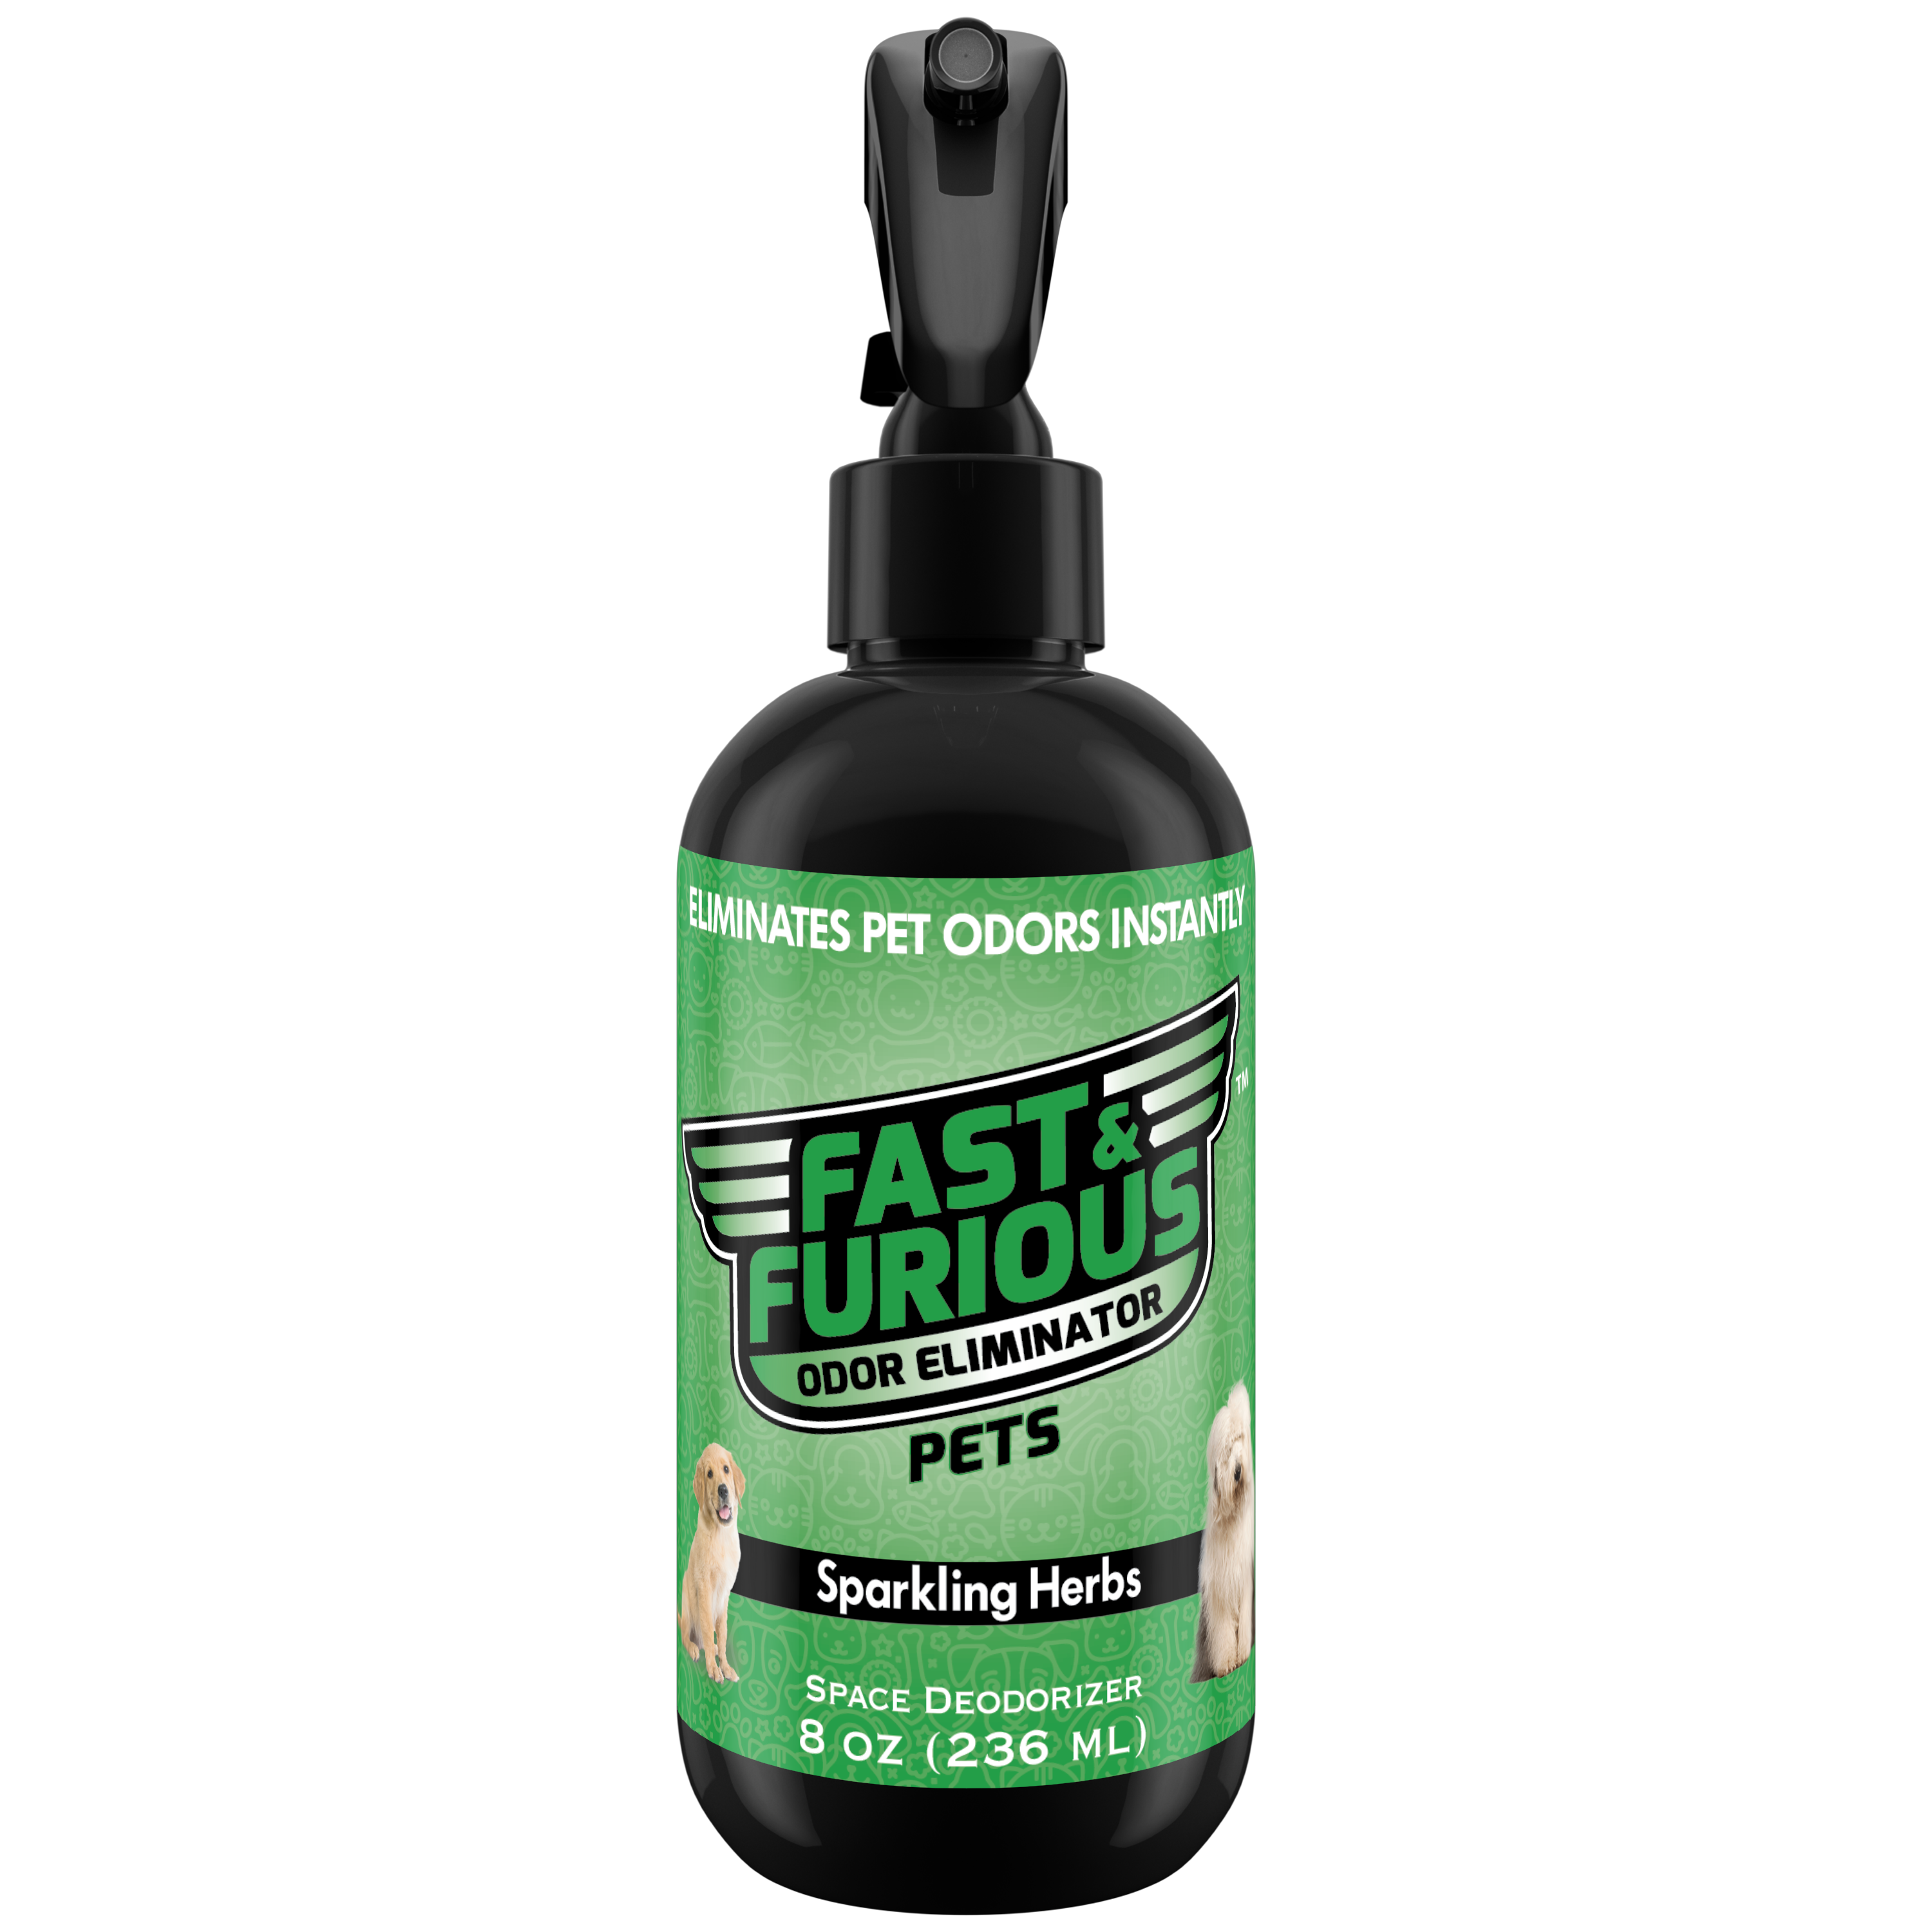 Fast and Furious Pets Odor Eliminator - Sparkling Herbs Scent